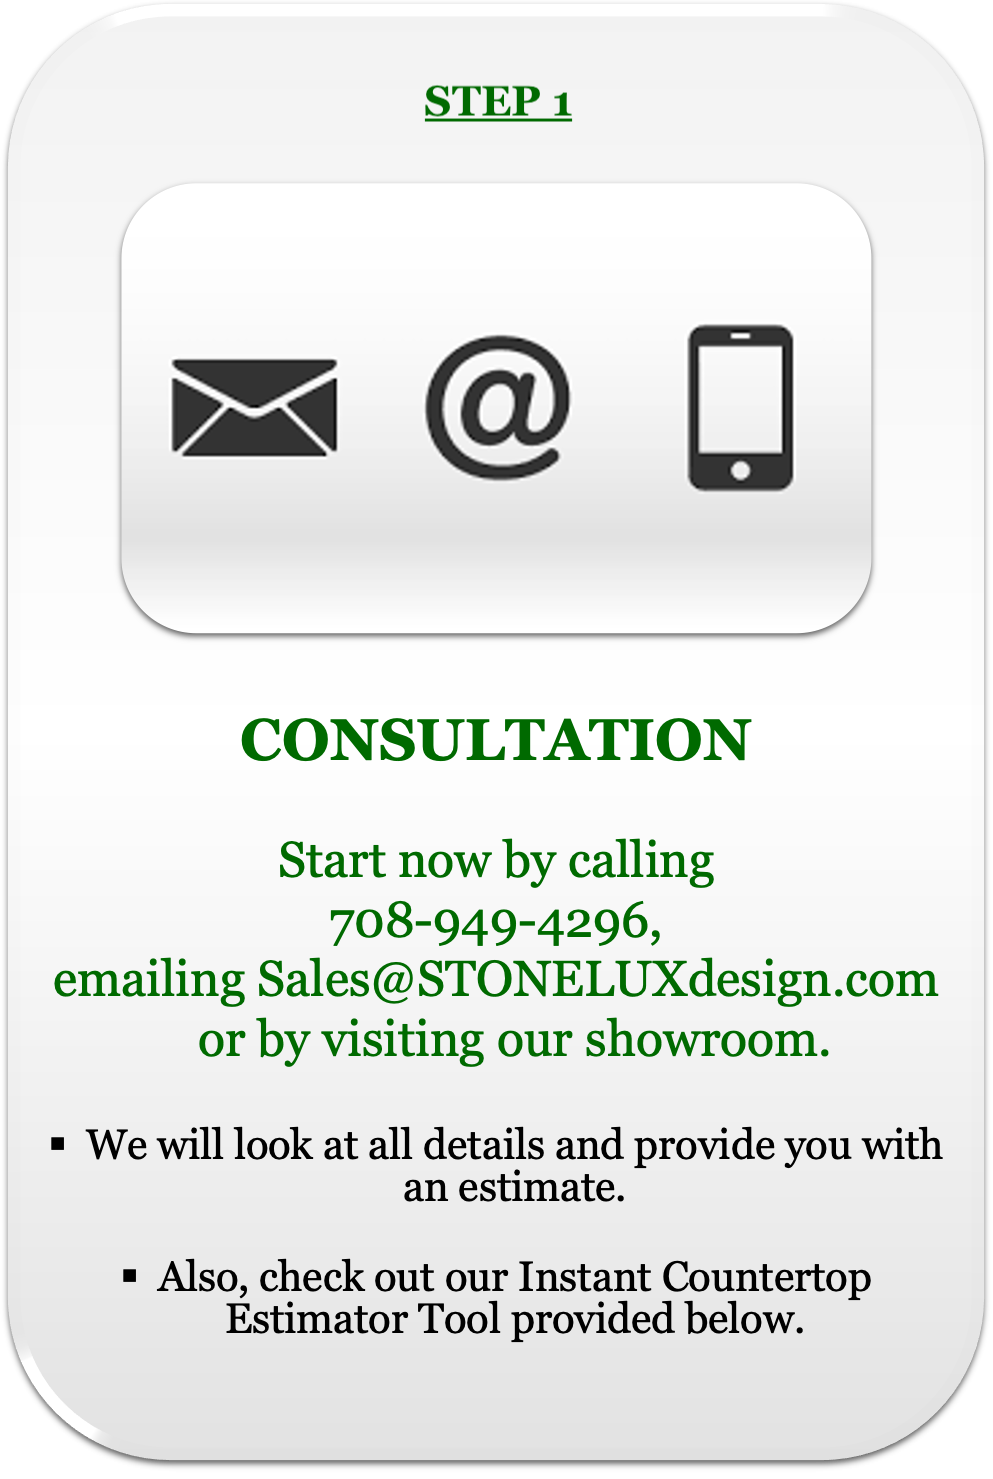 Step 1 is contacting us for a free consultation